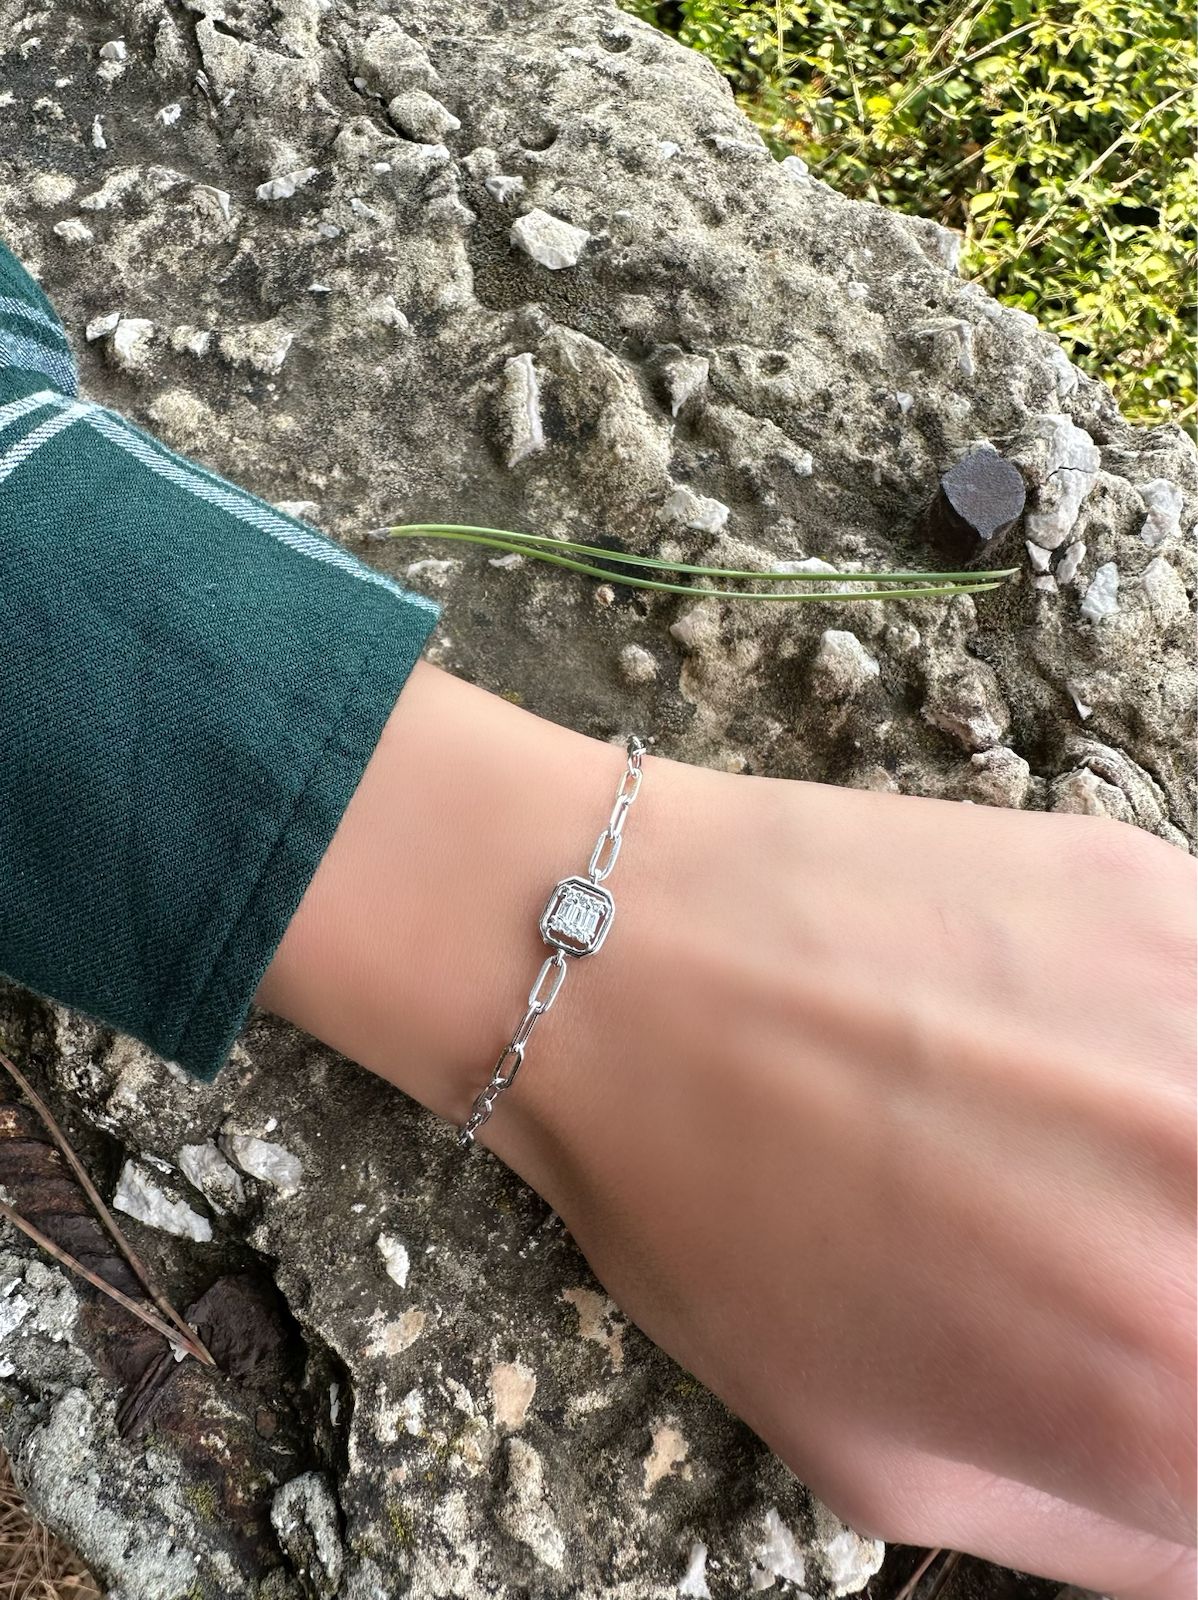 Mariner Link Bracelet With Square Stone In the Middle